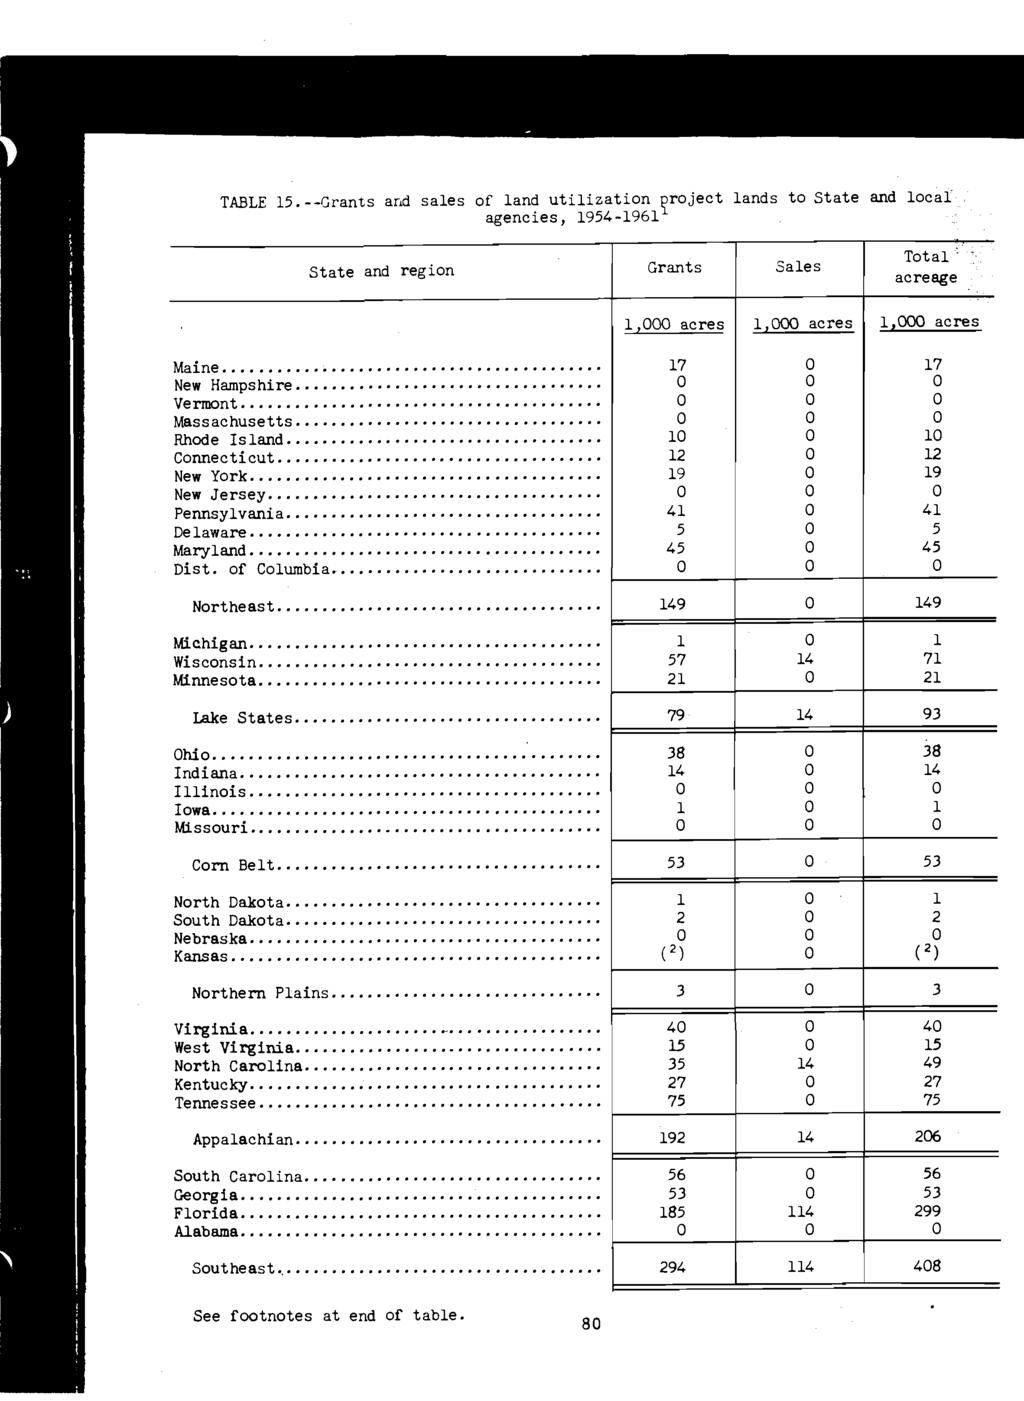 TABLE 15. --Grants and sales of land utilization agencies, 1954-1961 roject lands to State and local State and region Grants Sales Total - acreage 1,000 acres 1,000 acres 1.